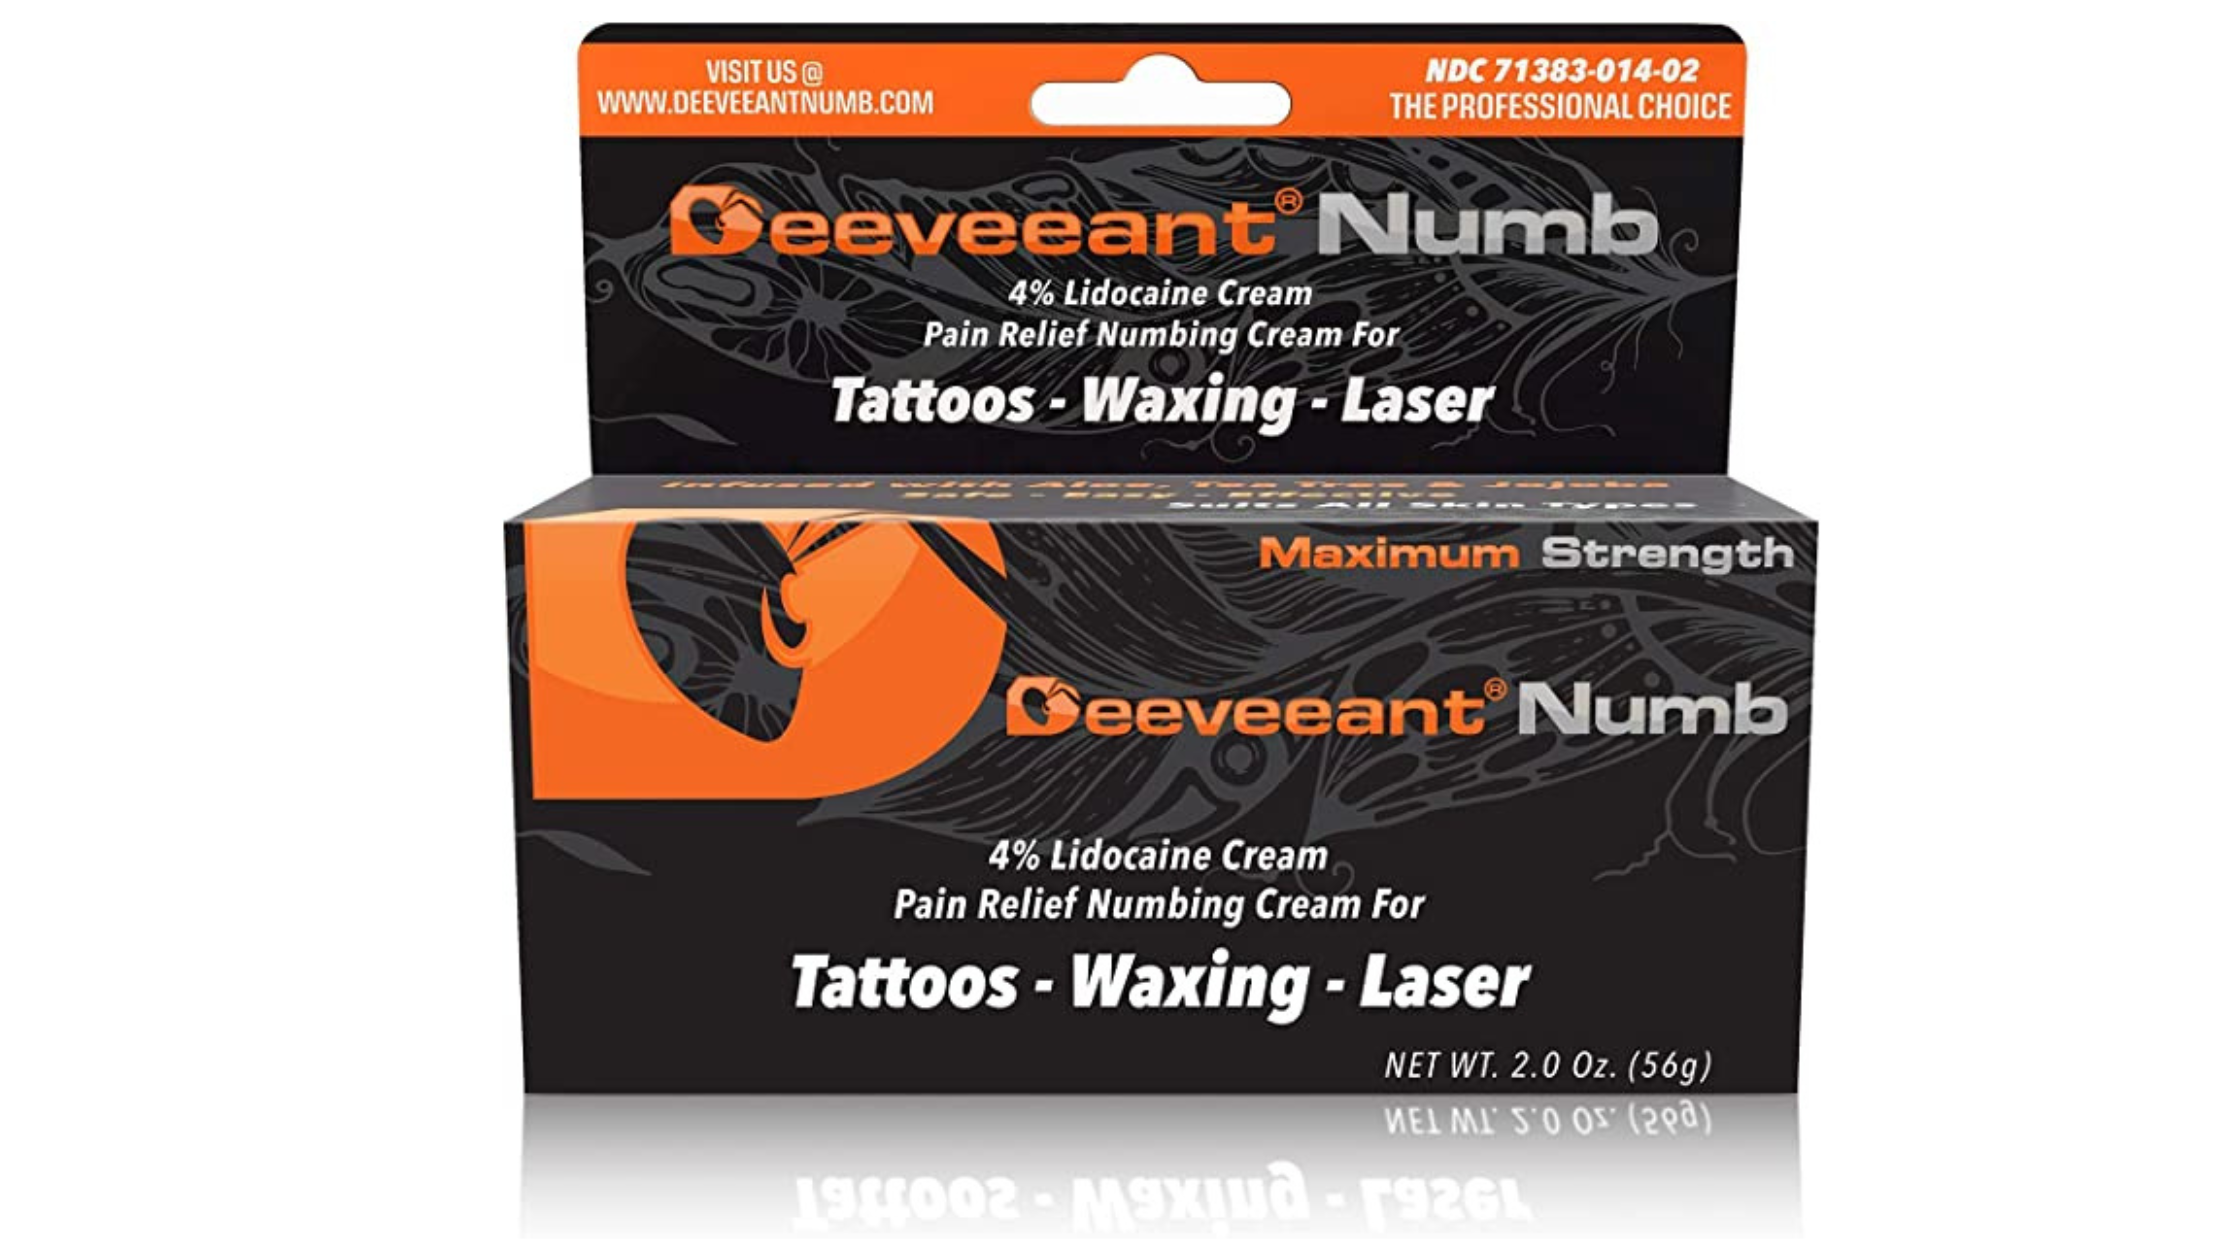 Dr Numb 5 Lidocaine Numbing Cream  Topical Numbing Cream for Laser   Tattoo Removal  DermaEnvy Skincare  Medical Aesthetics  Laser Hair  Removal and Skin Care Clinic